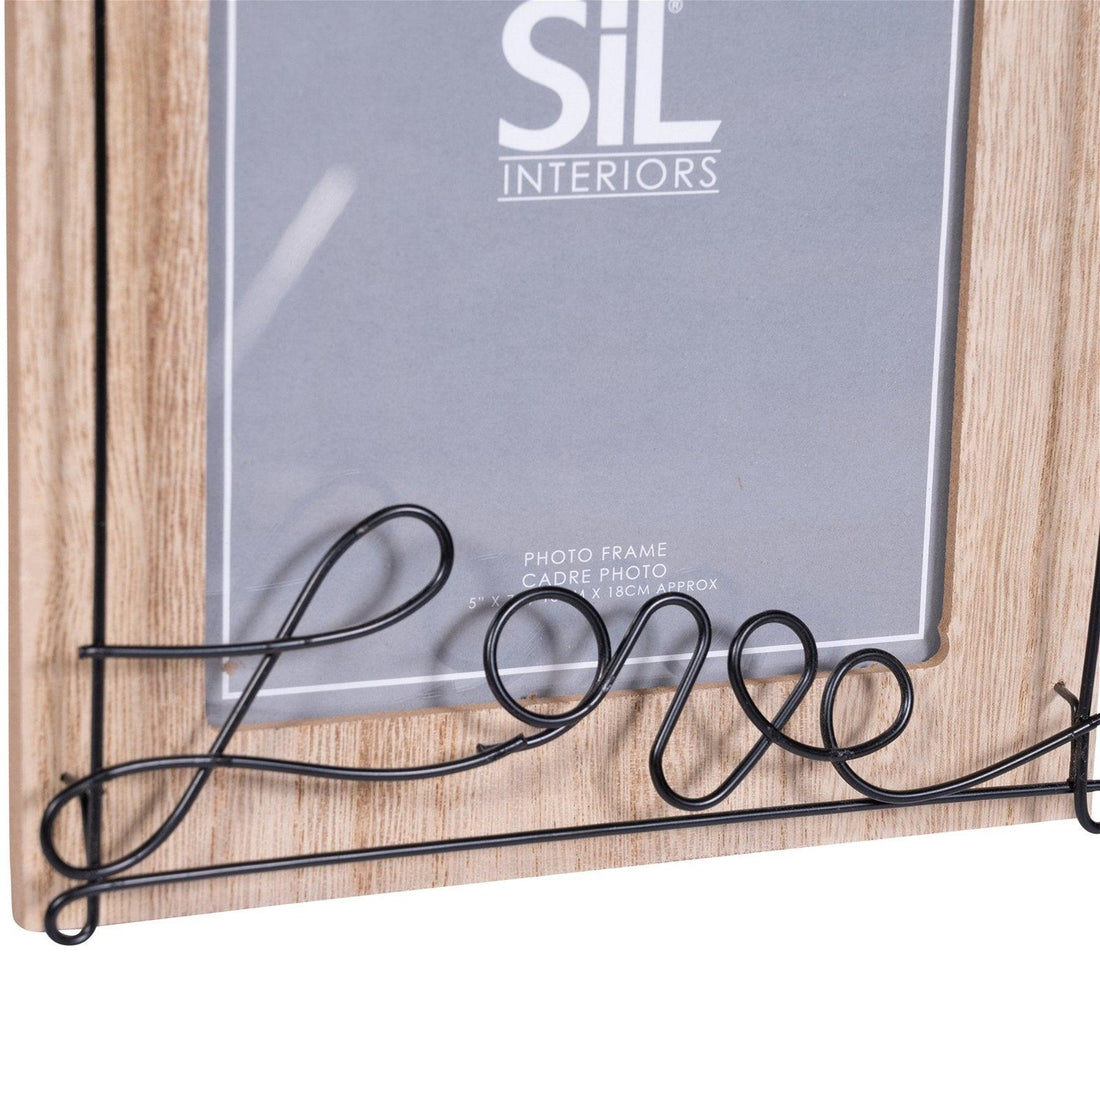 Wooden Photo Frame with Black Wire Love Script 5x7" - £16.99 - Photo Frames 